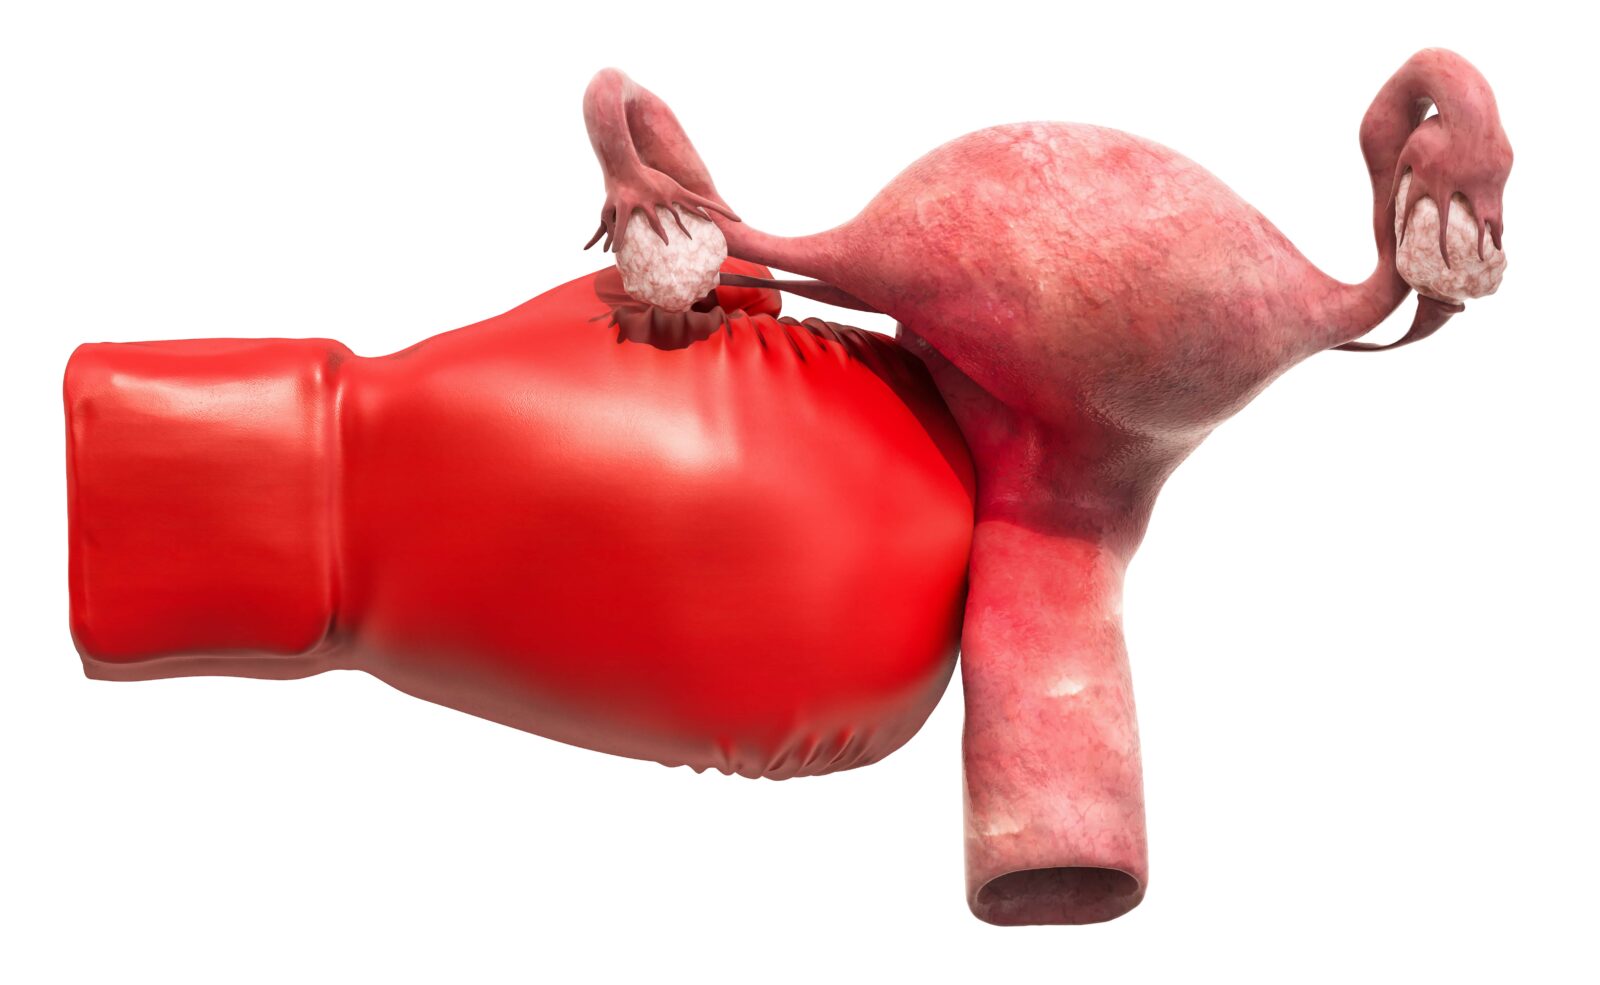 boxing glove punching a giant uterus to indicate pain